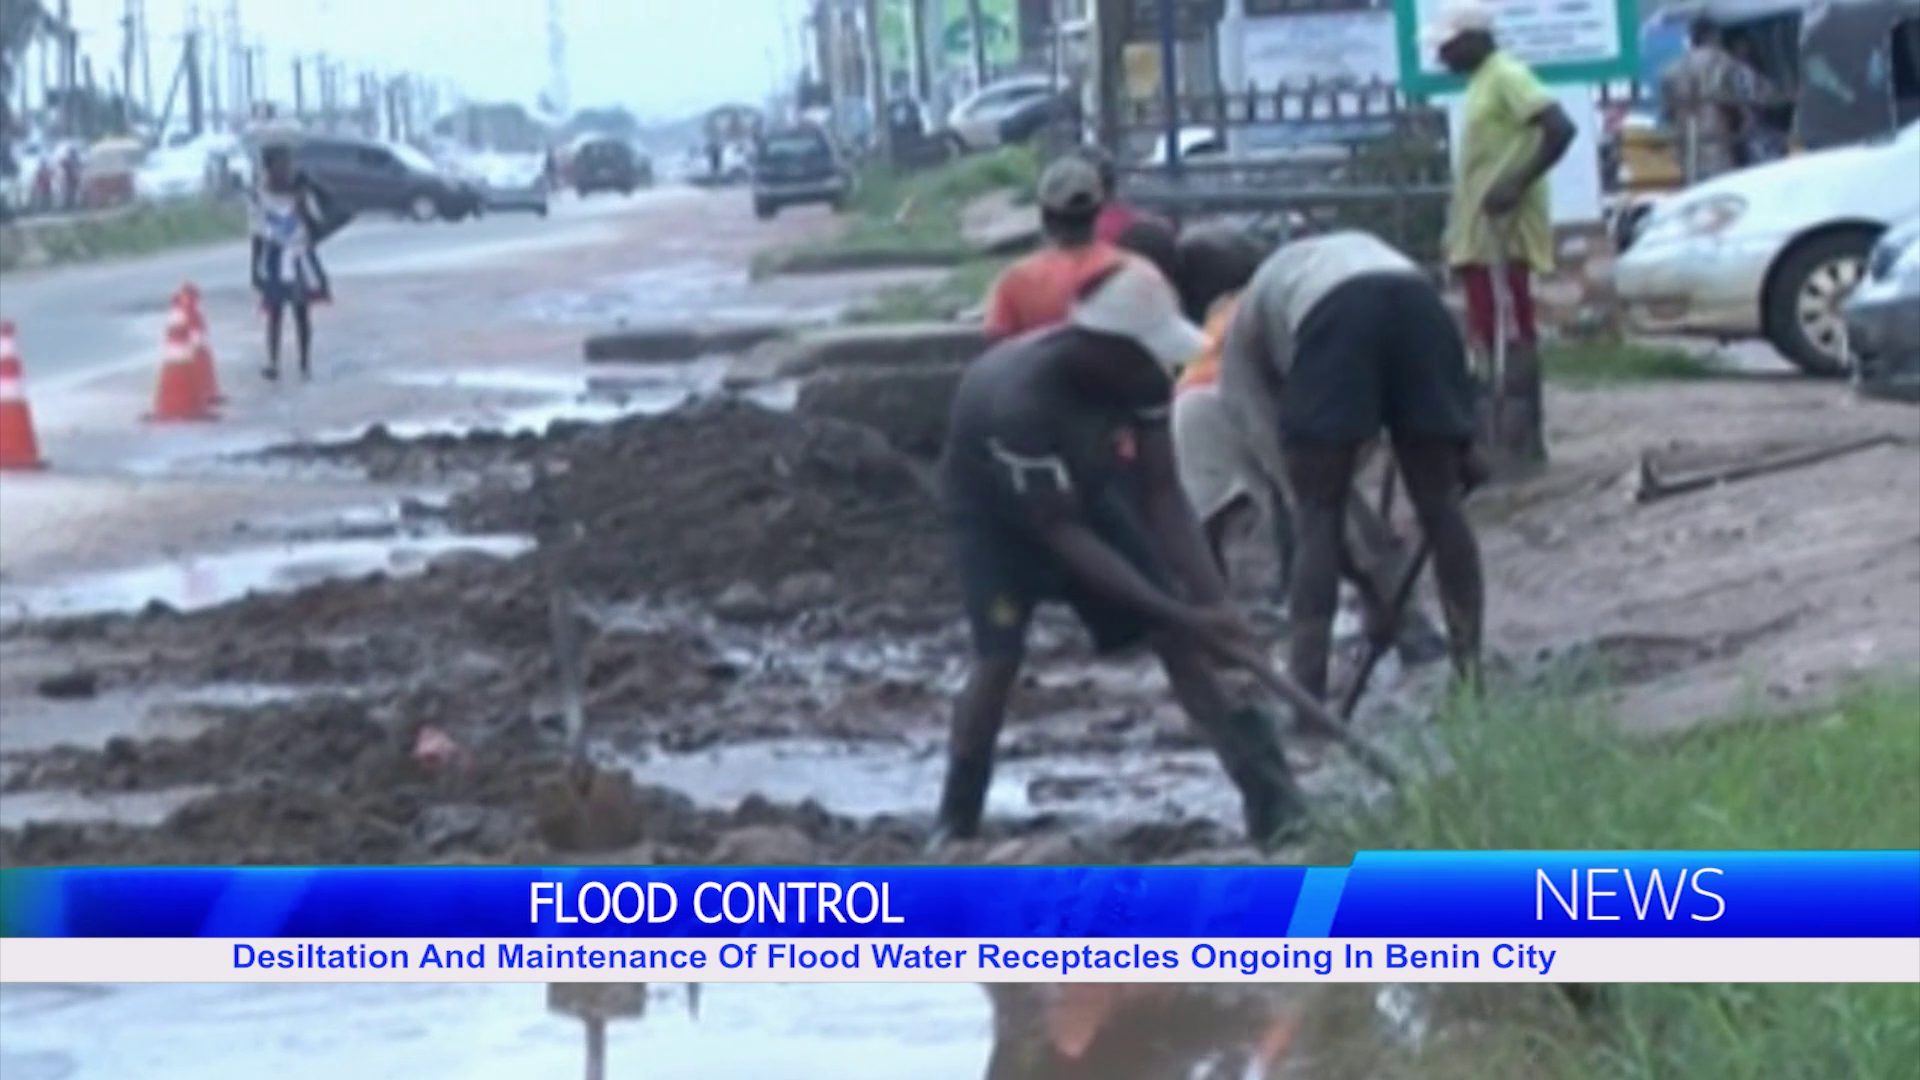 Desiltation And Maintenance Of Flood Water Receptacles Ongoing In Benin City